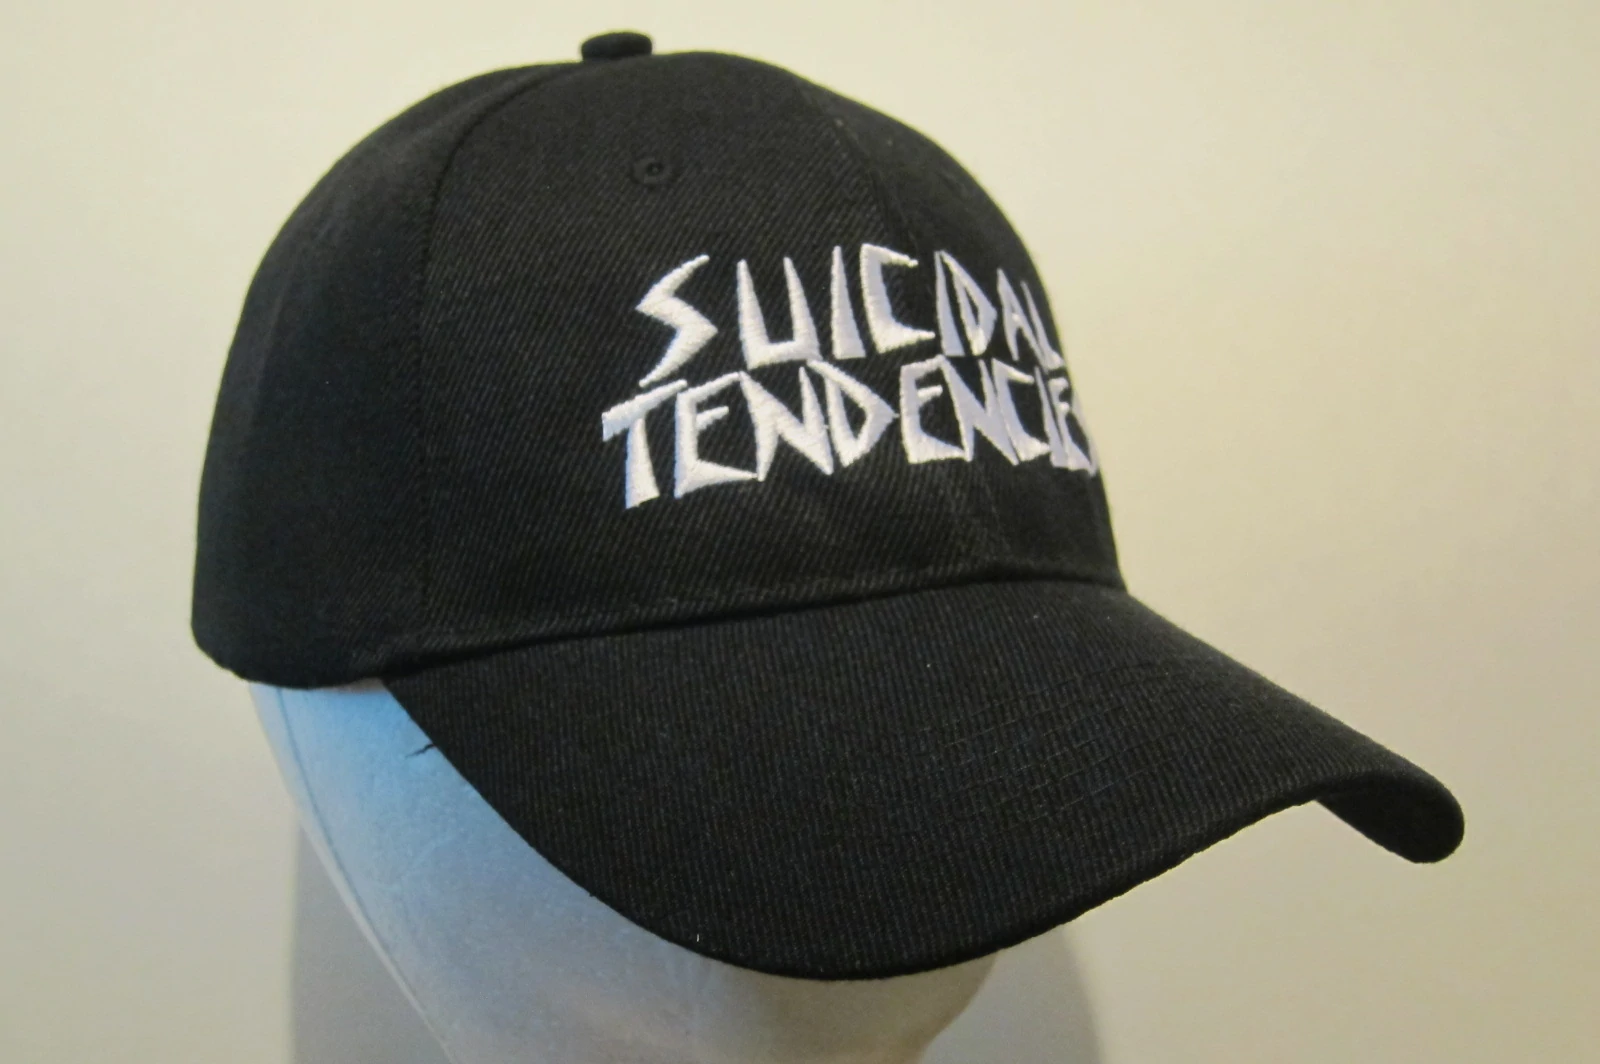 SUICIDAL TENDENCIES- Embroidered - Baseball Cap - Adjustable Velcro Back - One Size Fits All UNISEX